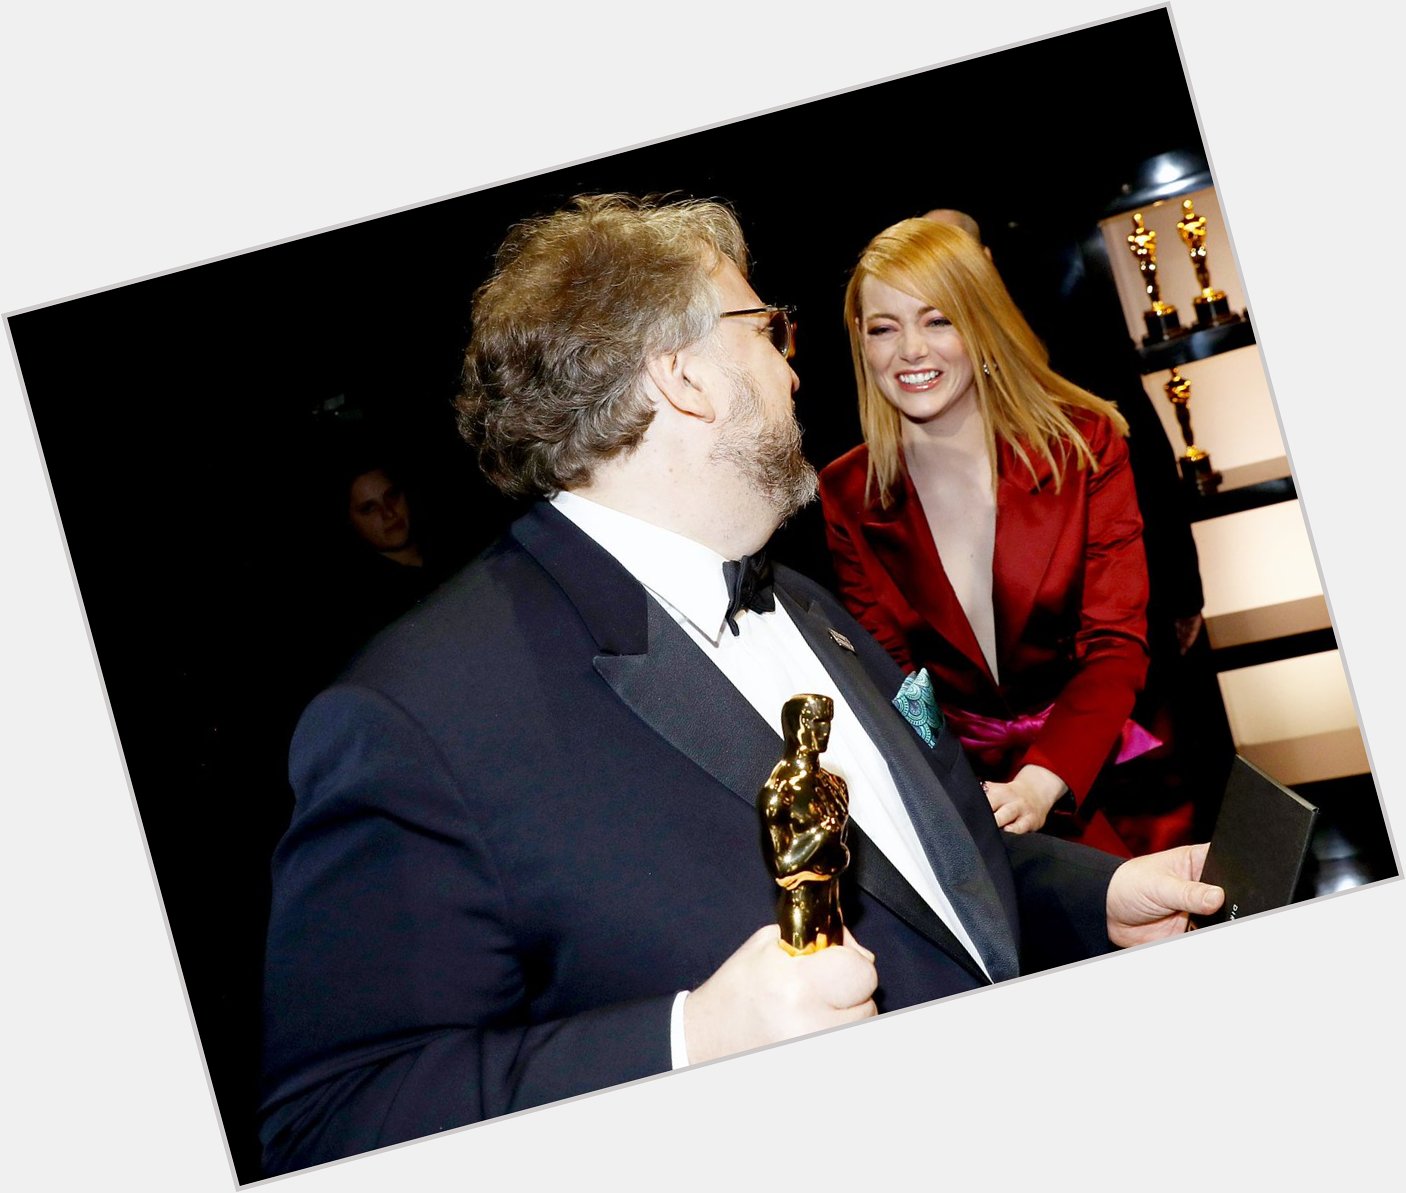 Happy birthday to the incredibly talented and wonderful inspiration, Guillermo Del Toro!  